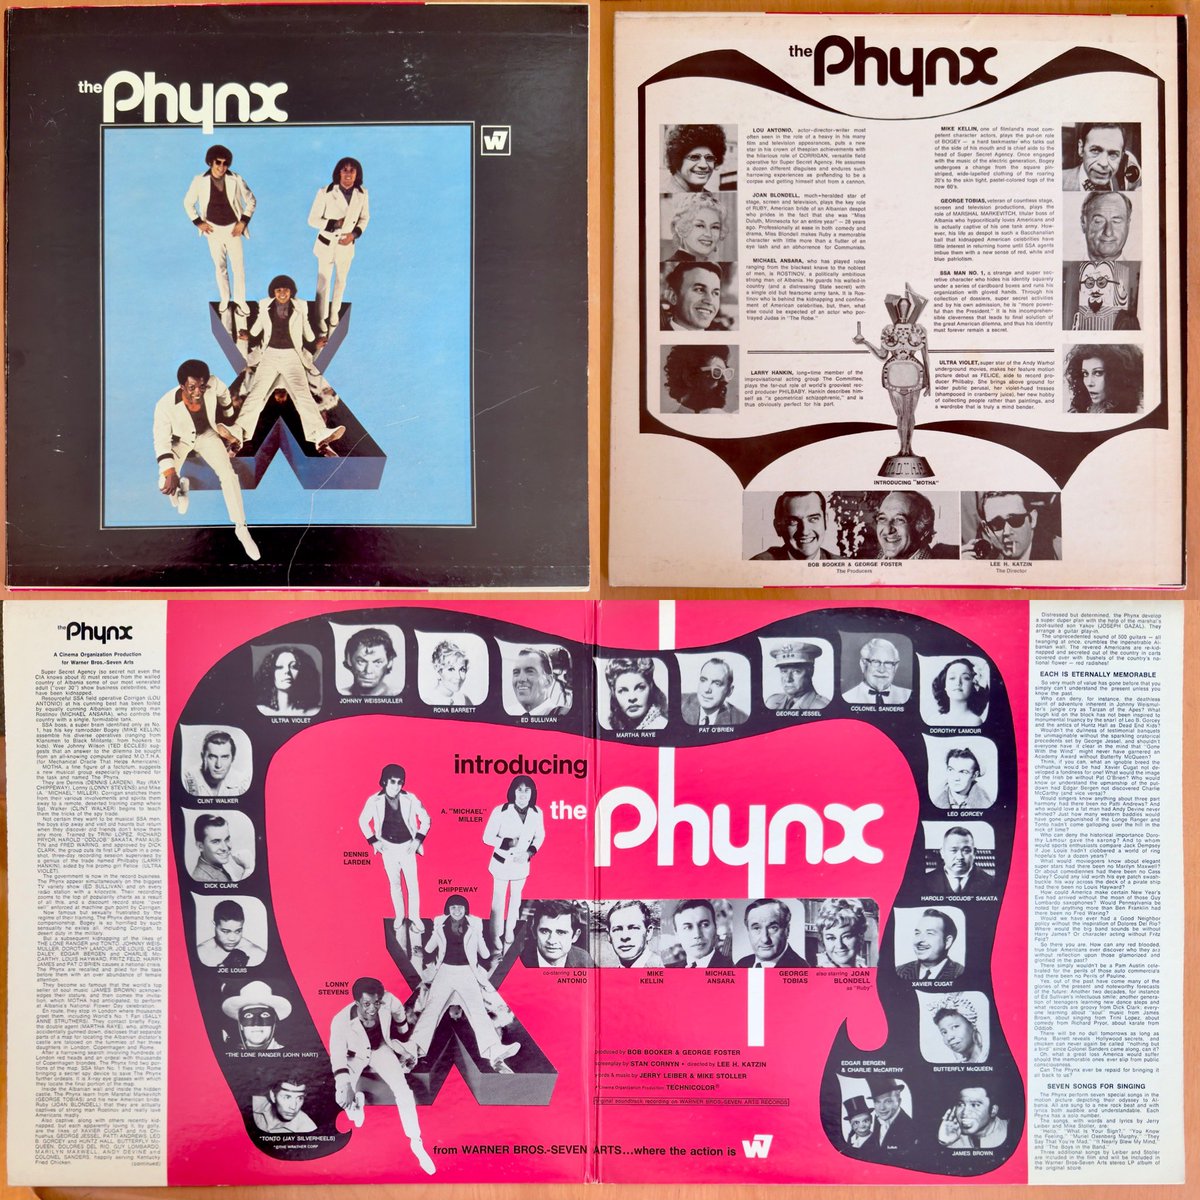 Fake THE PHYNX album art that was used as promotional items.  A fascinating discussion with music producer @andyzax , who is behind the reissues of Judee Sill, John Cale, The Complete Woodstock, about the why and the how of this horrible music. shows.acast.com/64de4e5db2838f…